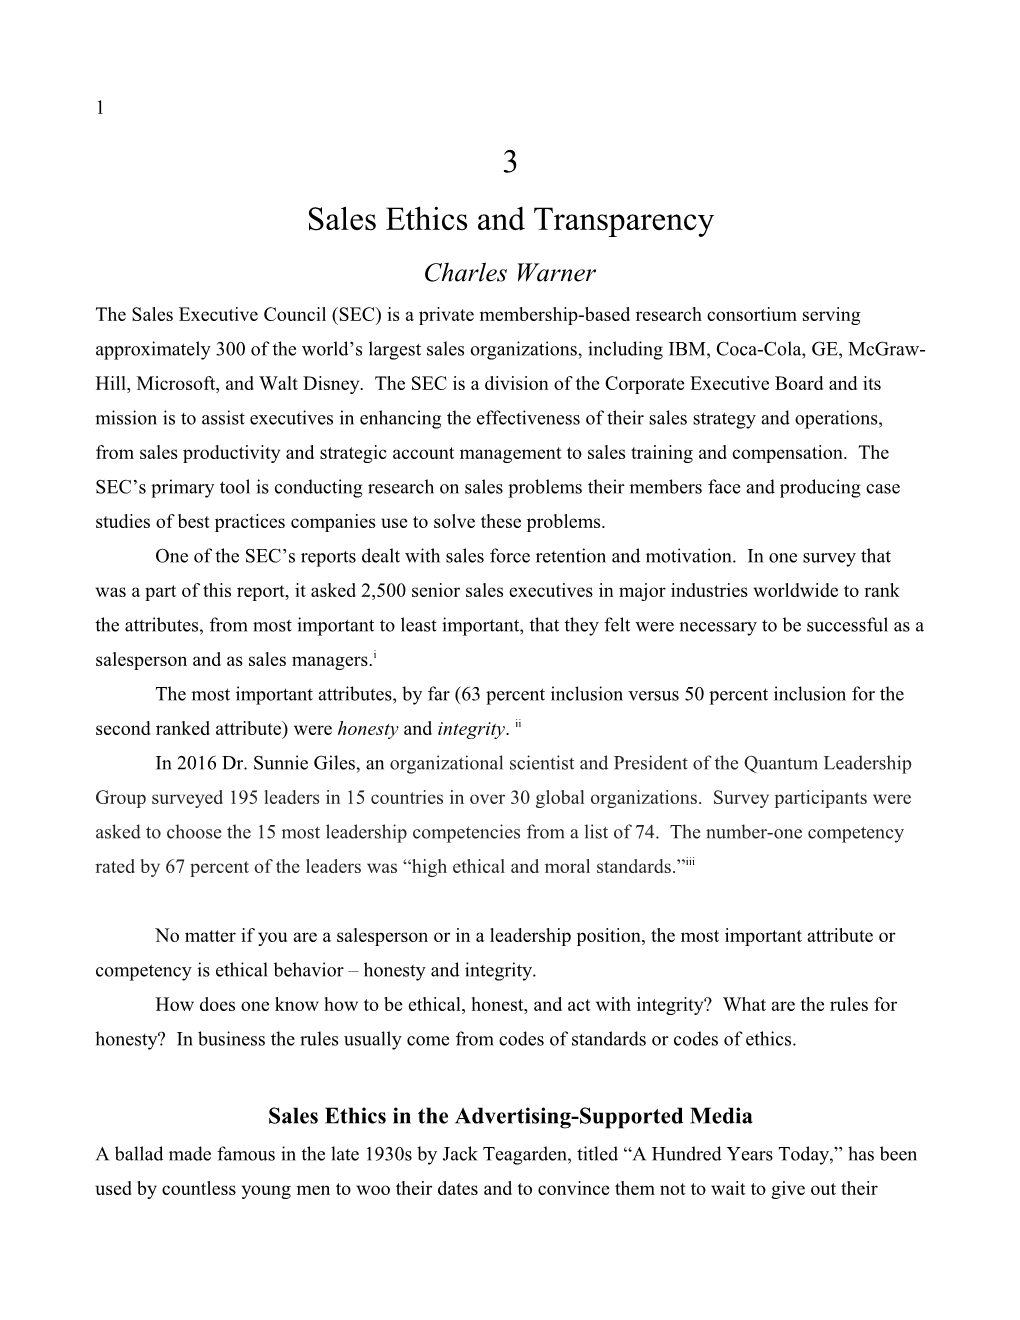 Sales Ethics and Transparency